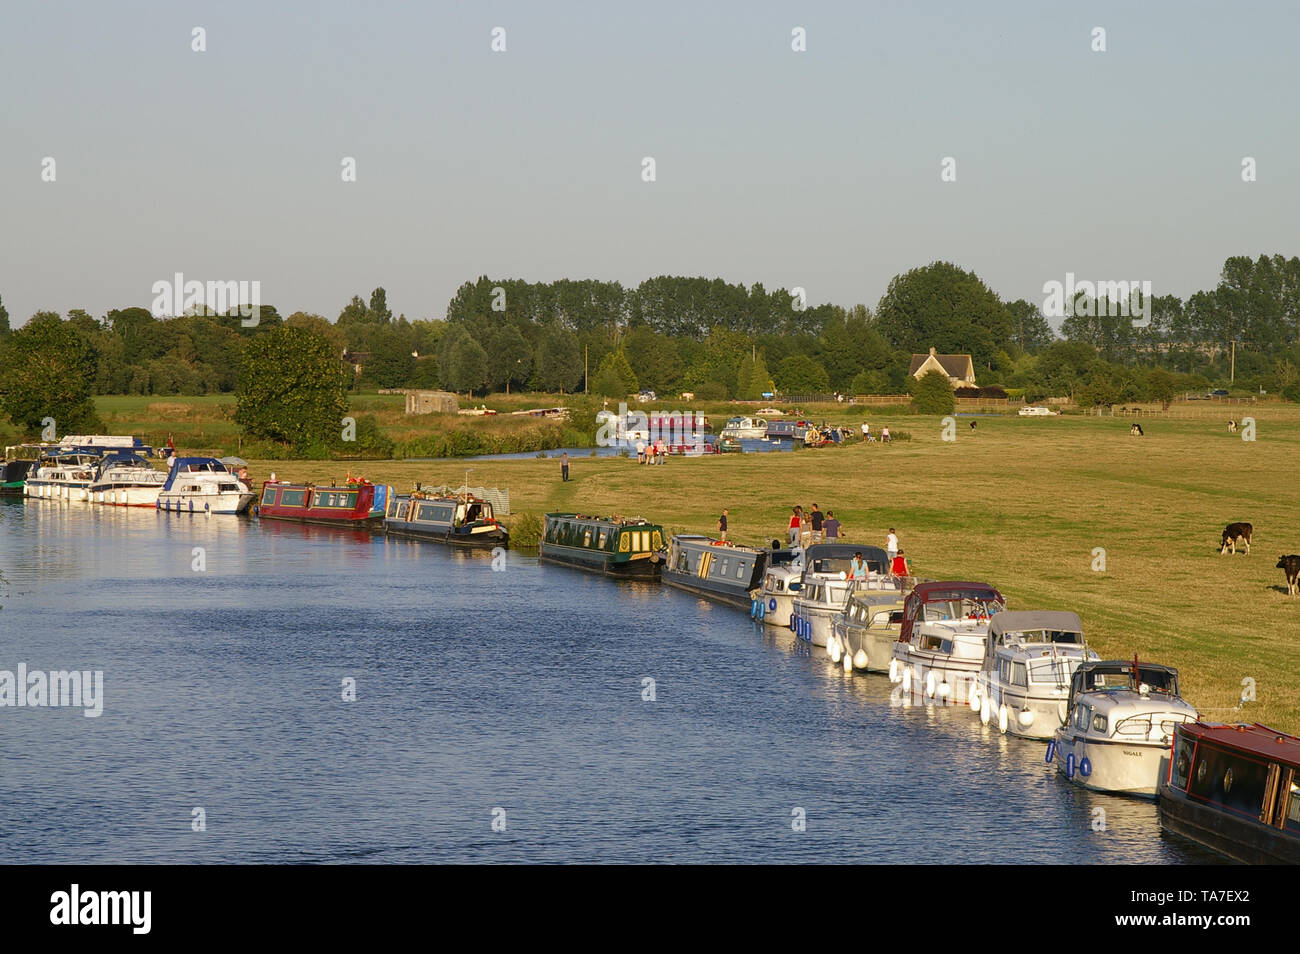 River Thames at Lechlade, or Lechlade-on-Thames, at the southern edge of the Cotswolds in Gloucestershire, UK. Start of navigable River Thames. Boats Stock Photo